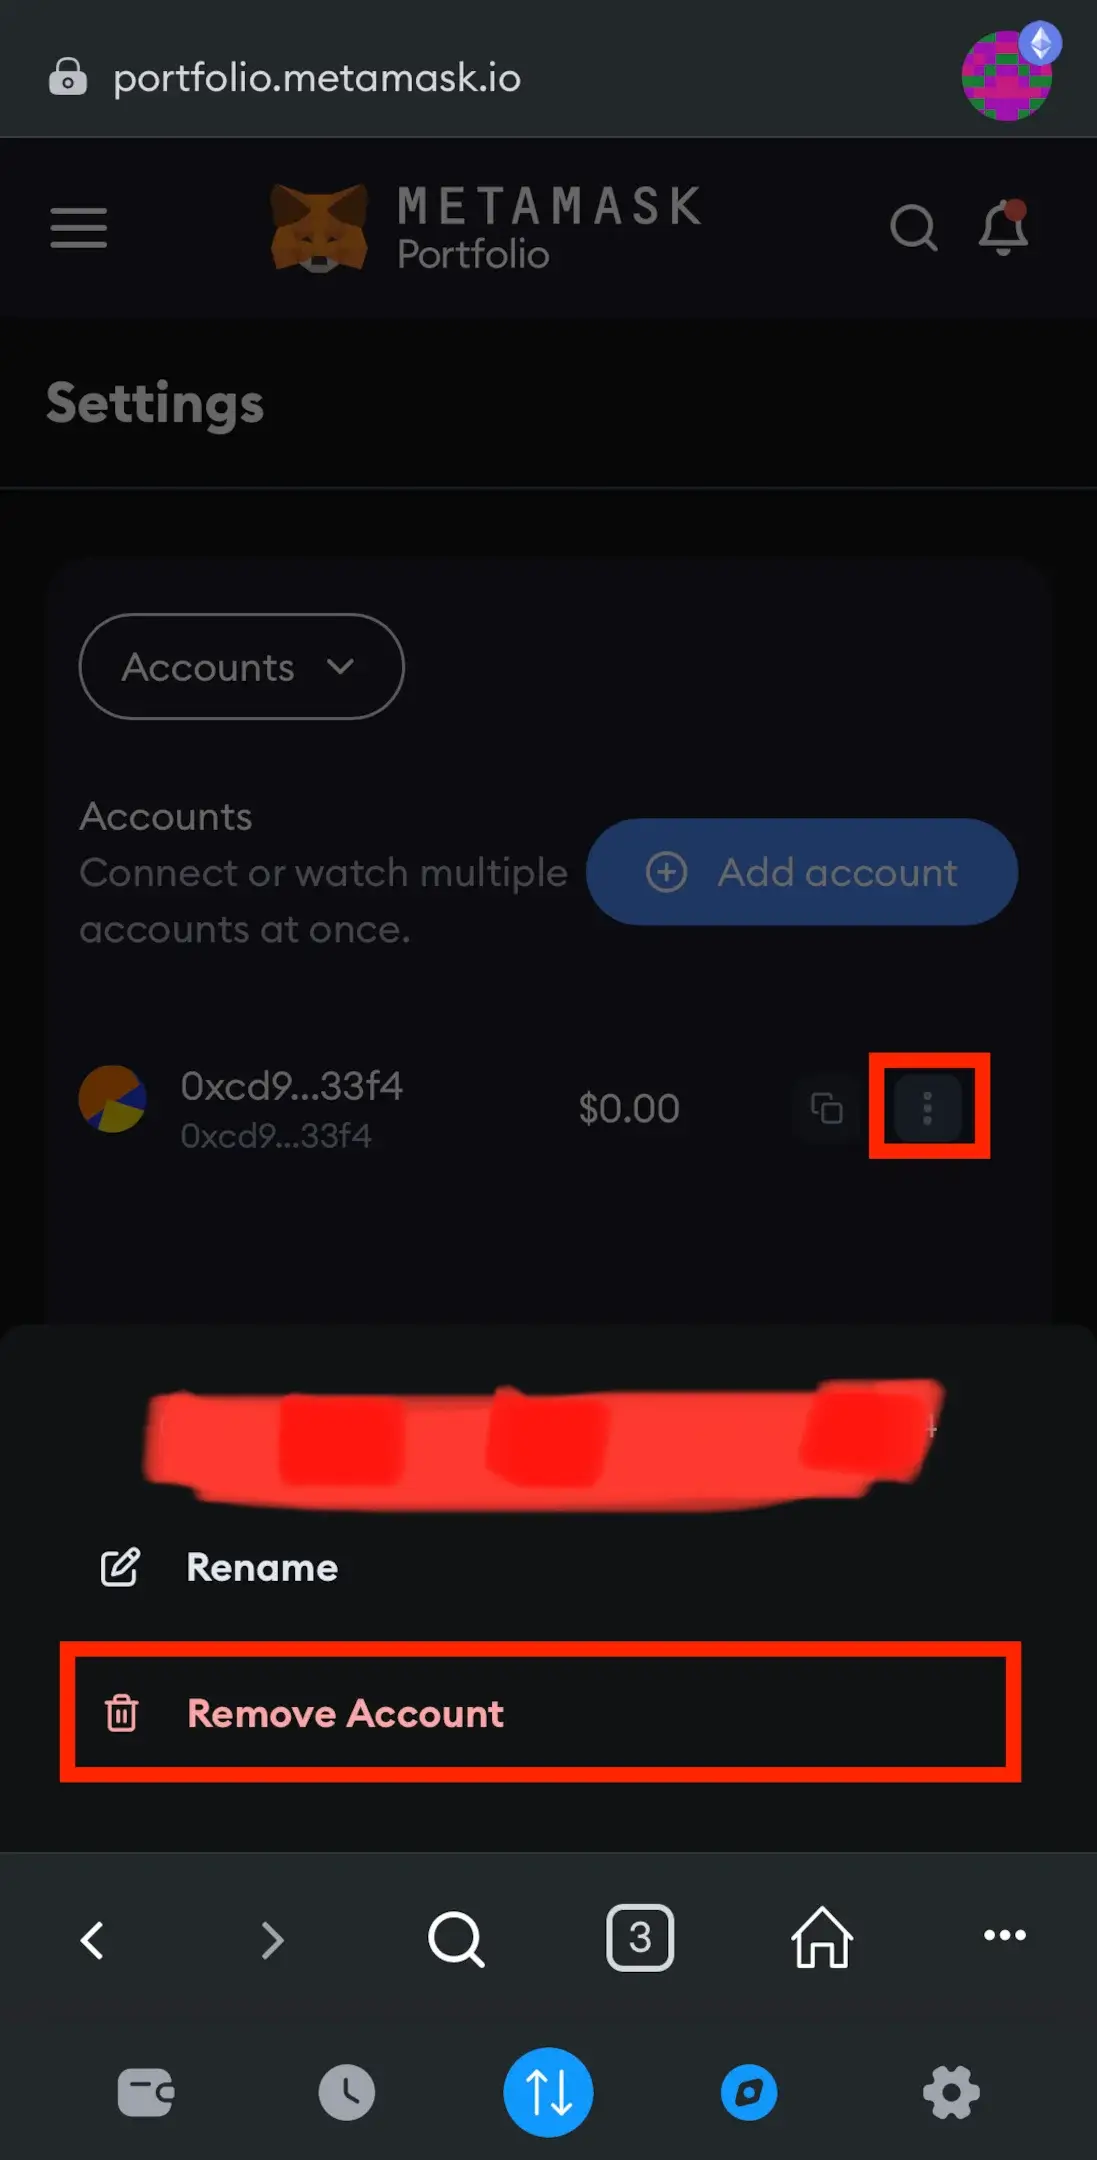 Step 5. Use the MetaMask Remove Account Option